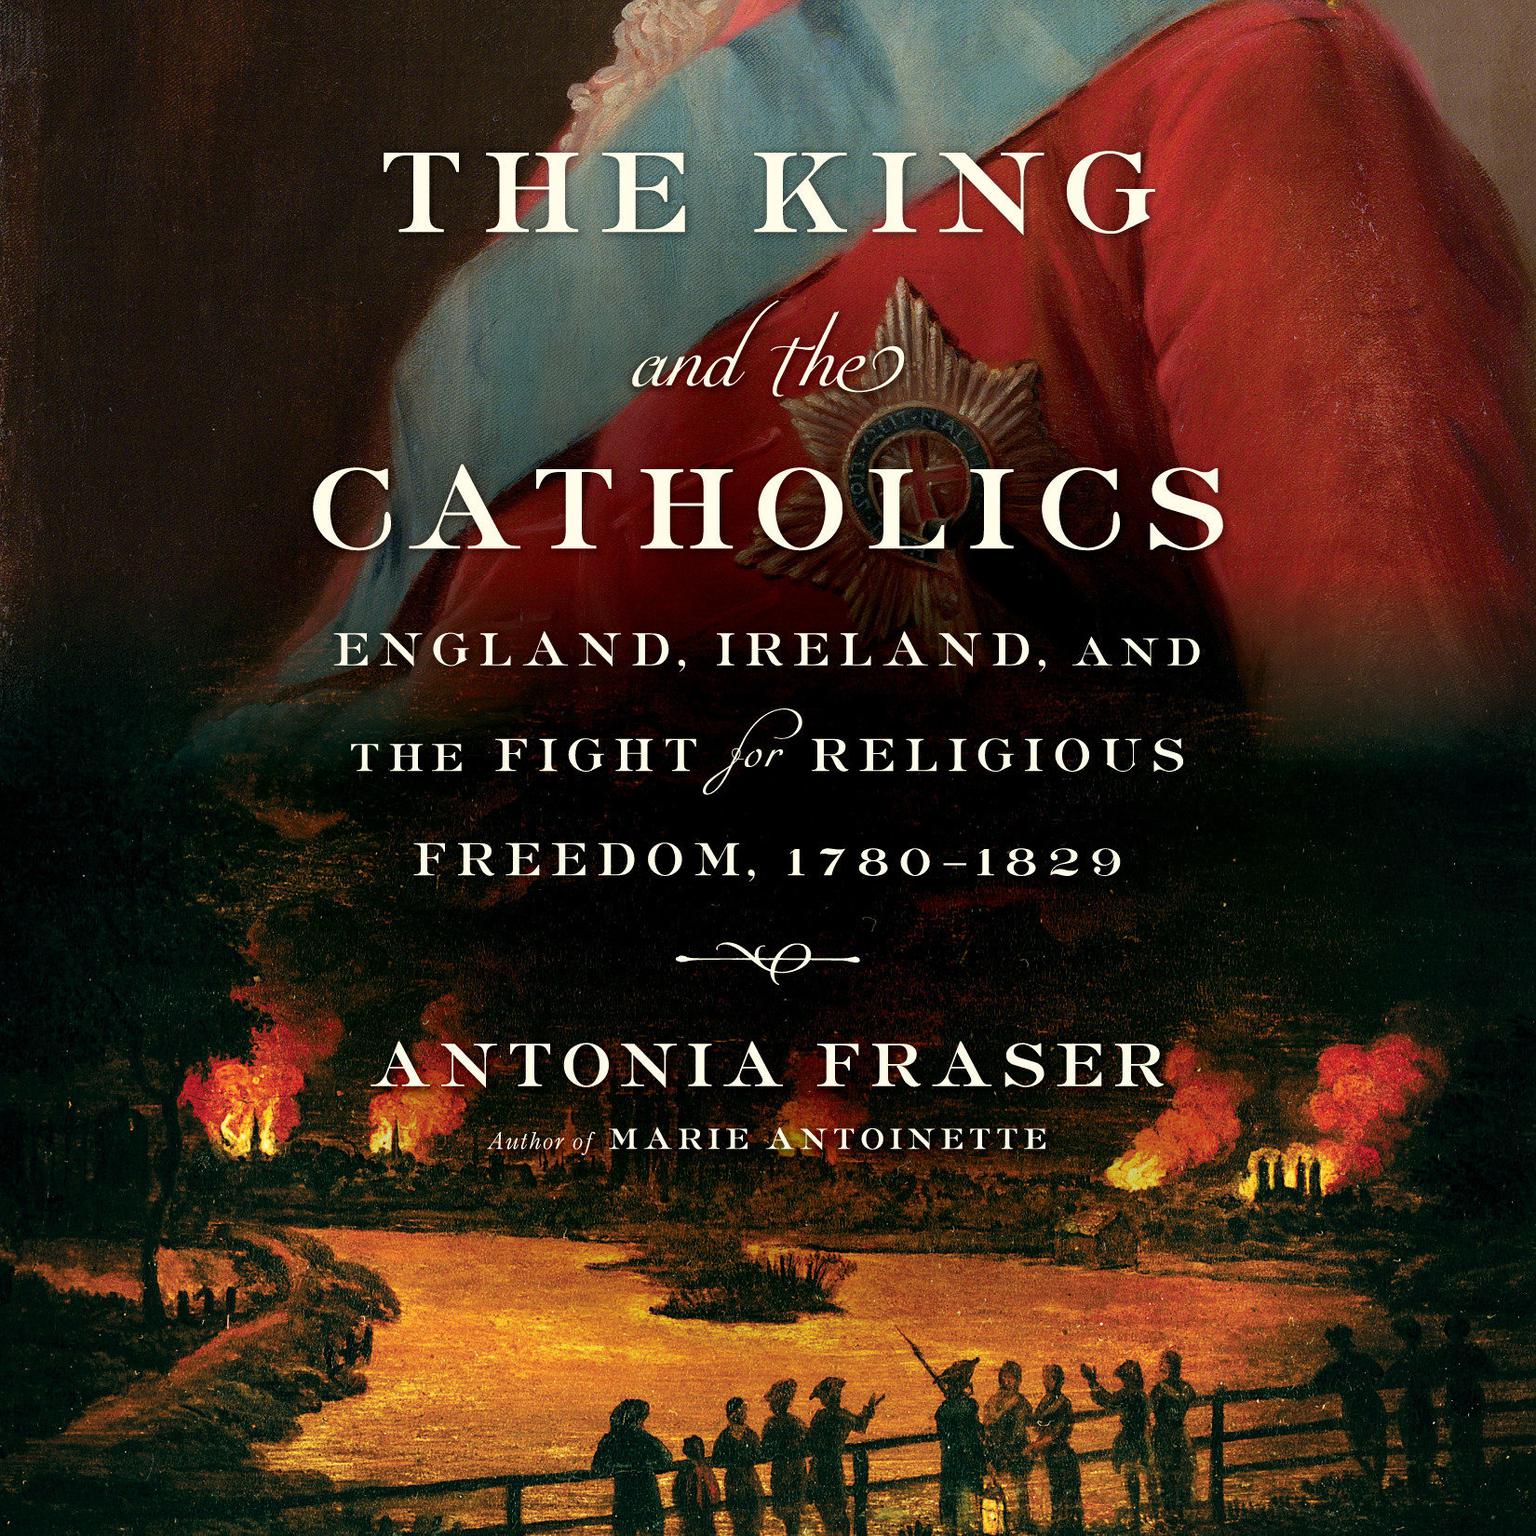 The King and the Catholics: England, Ireland, and the Fight for Religious Freedom, 1780-1829 Audiobook, by Antonia Fraser